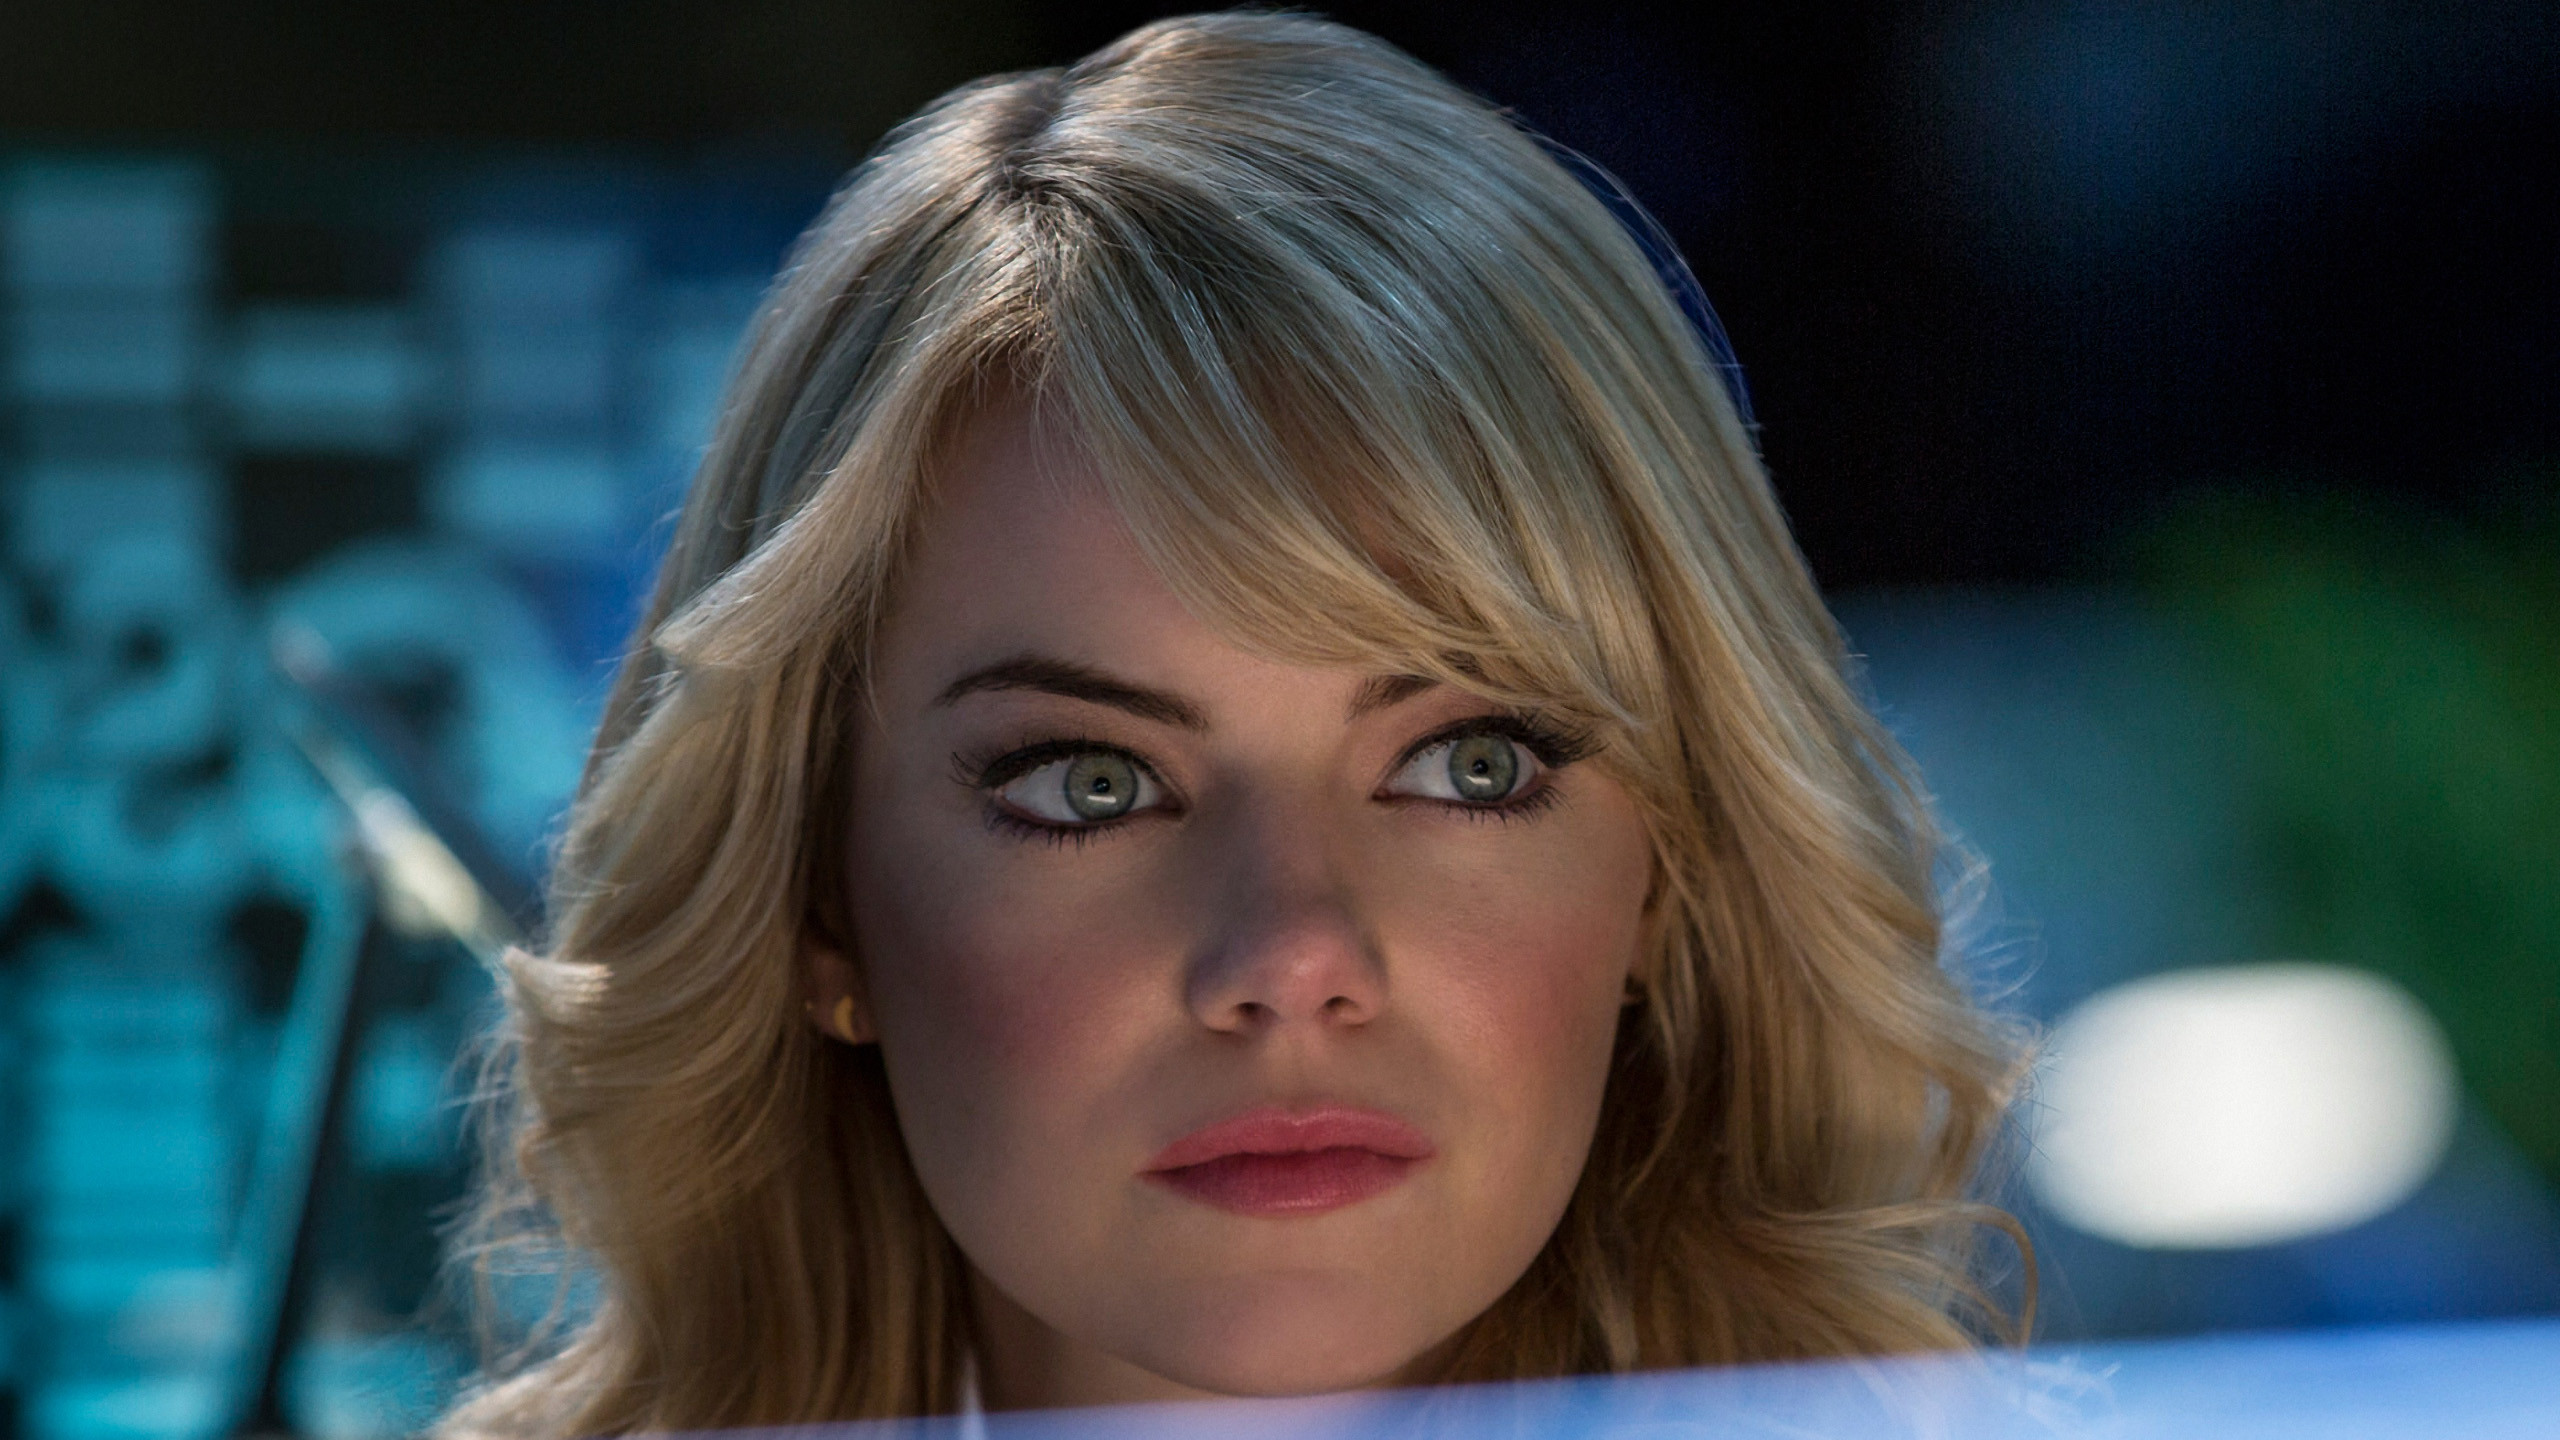 2560x1440 The Amazing Spider Man 2 Emma Stone wallpapers (51 Wallpapers)